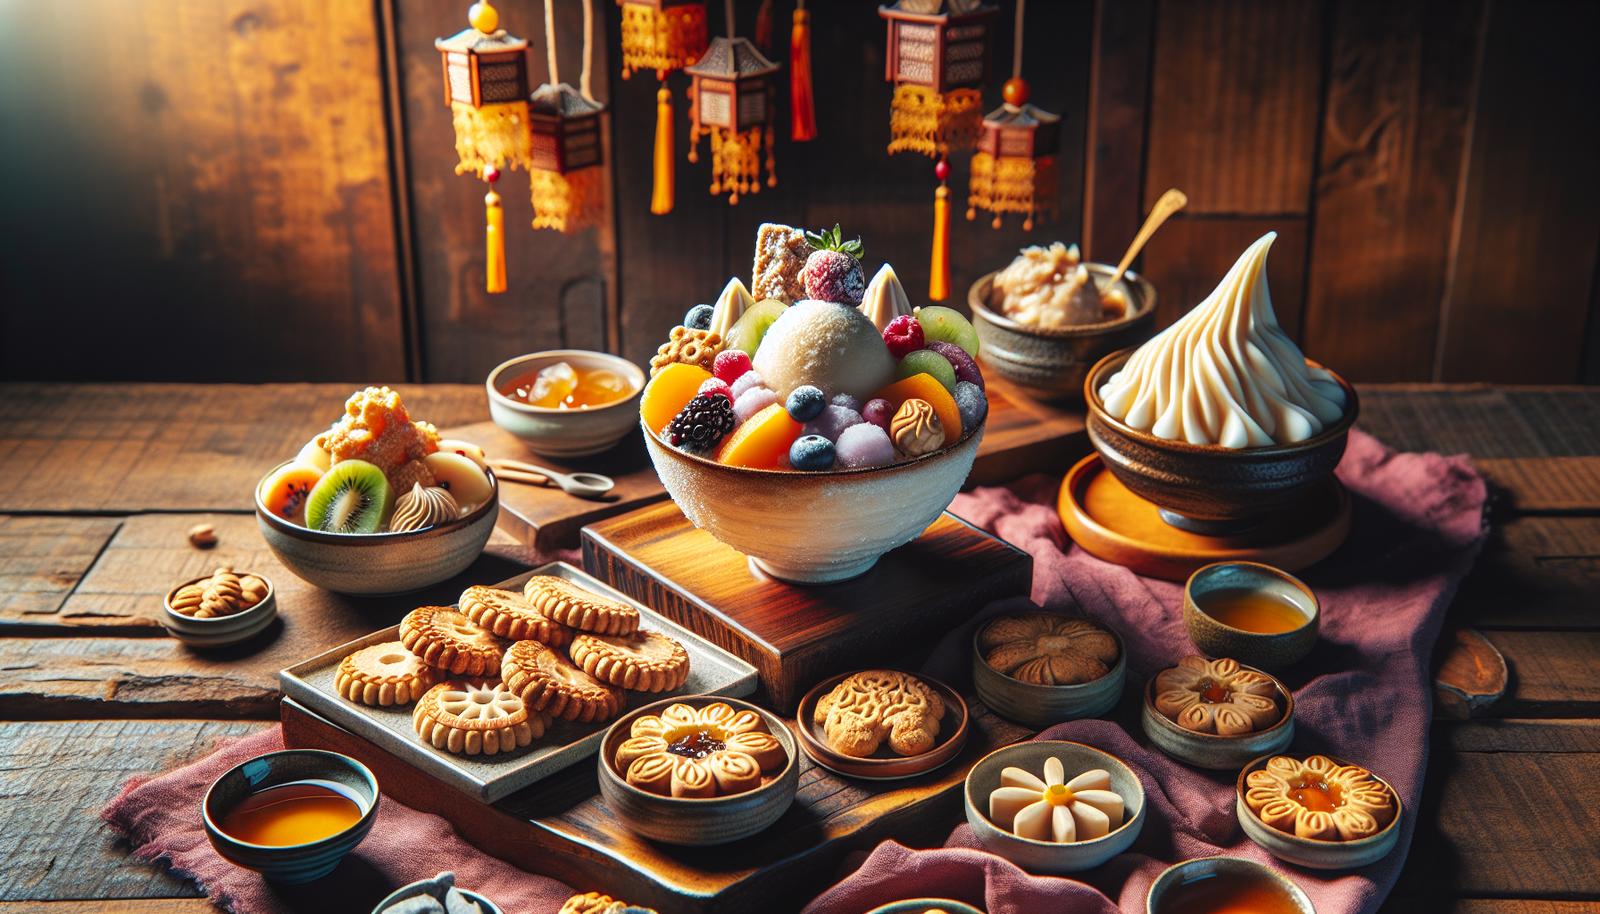 What Are Some Popular Korean Desserts And Sweets?